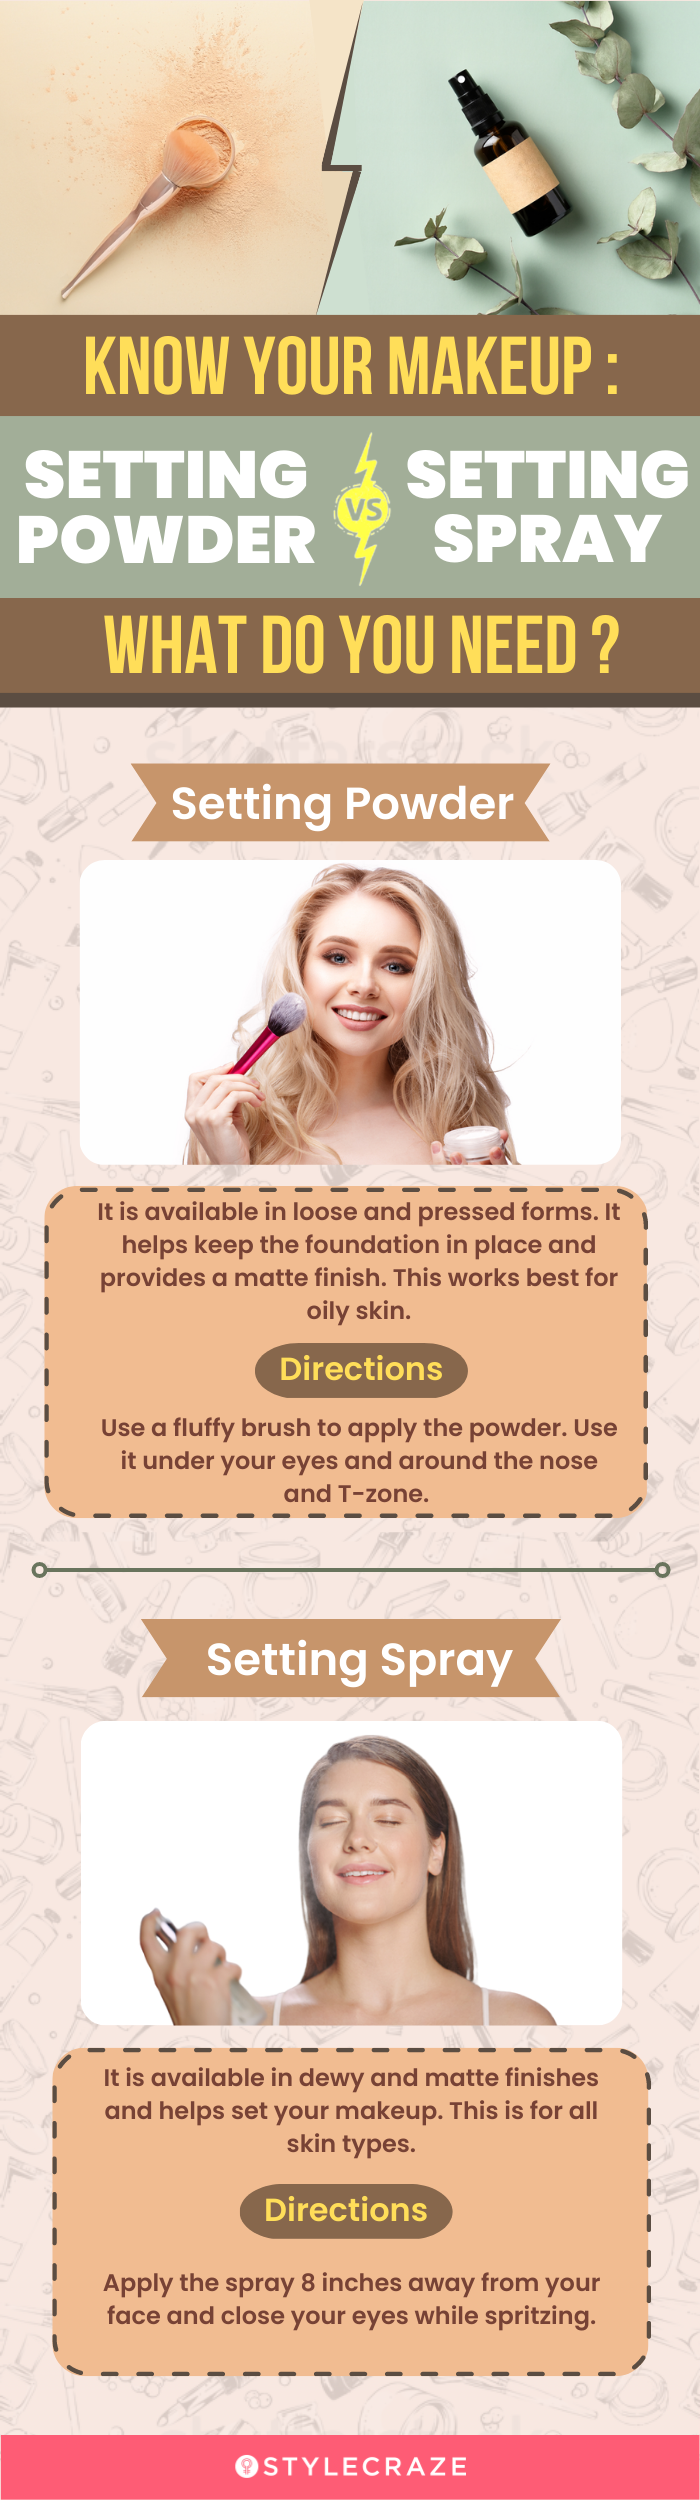 know your makeup setting powder vs setting spray, what do you need (infographic)